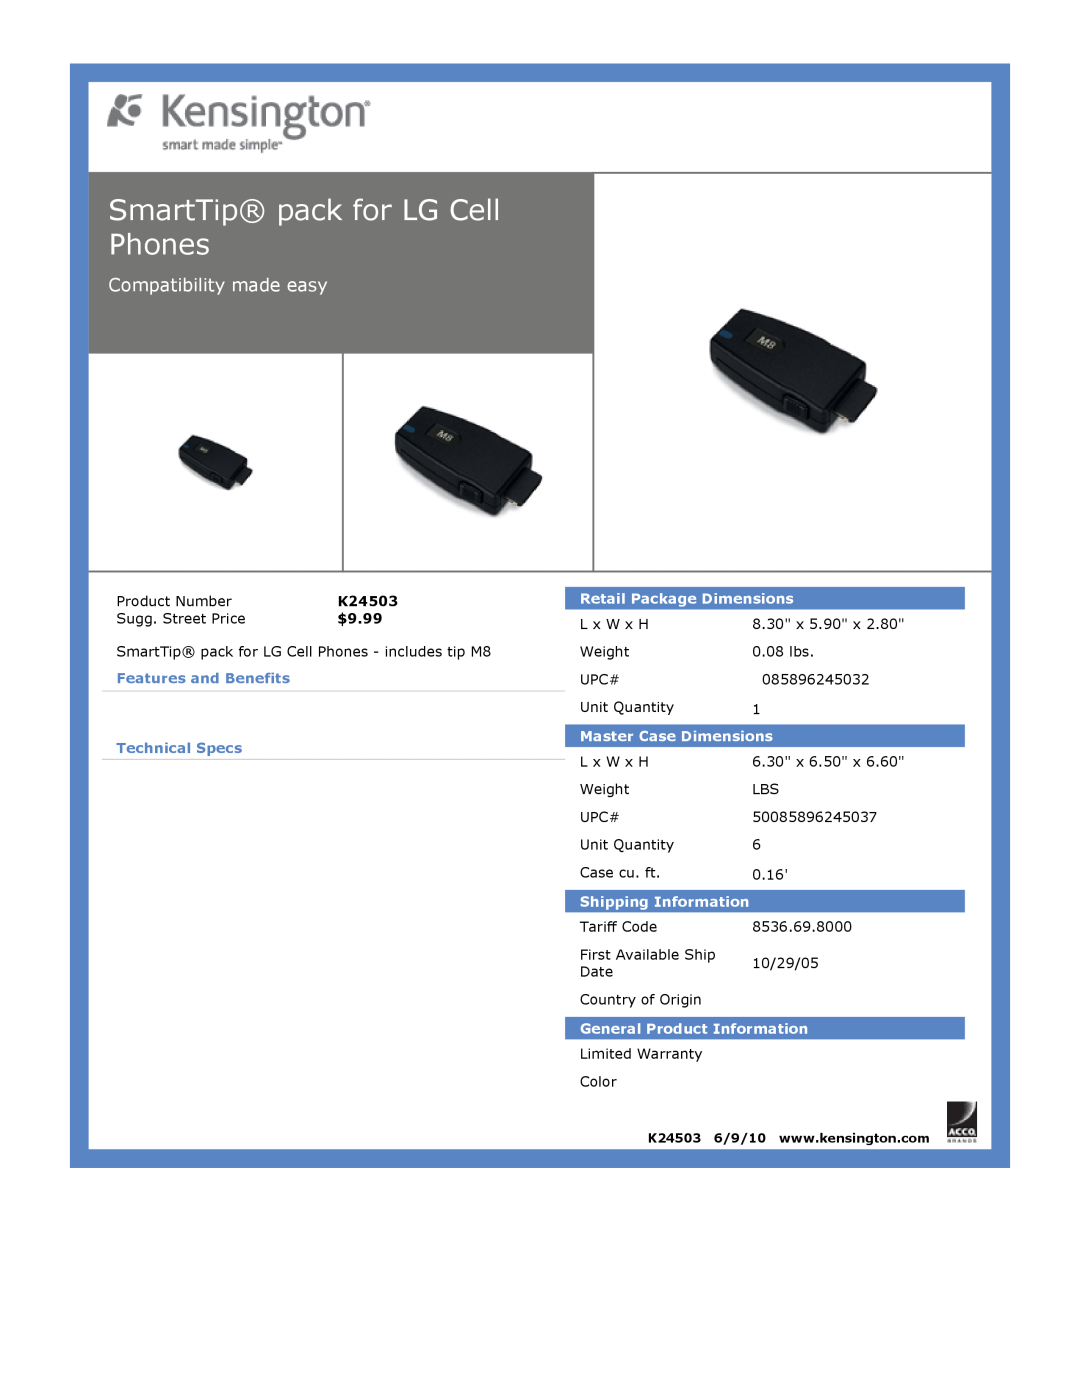 Kensington EU64325 SmartTip pack for LG Cell Phones, Compatibility made easy, $9.99, Features and Benefits Technical Specs 